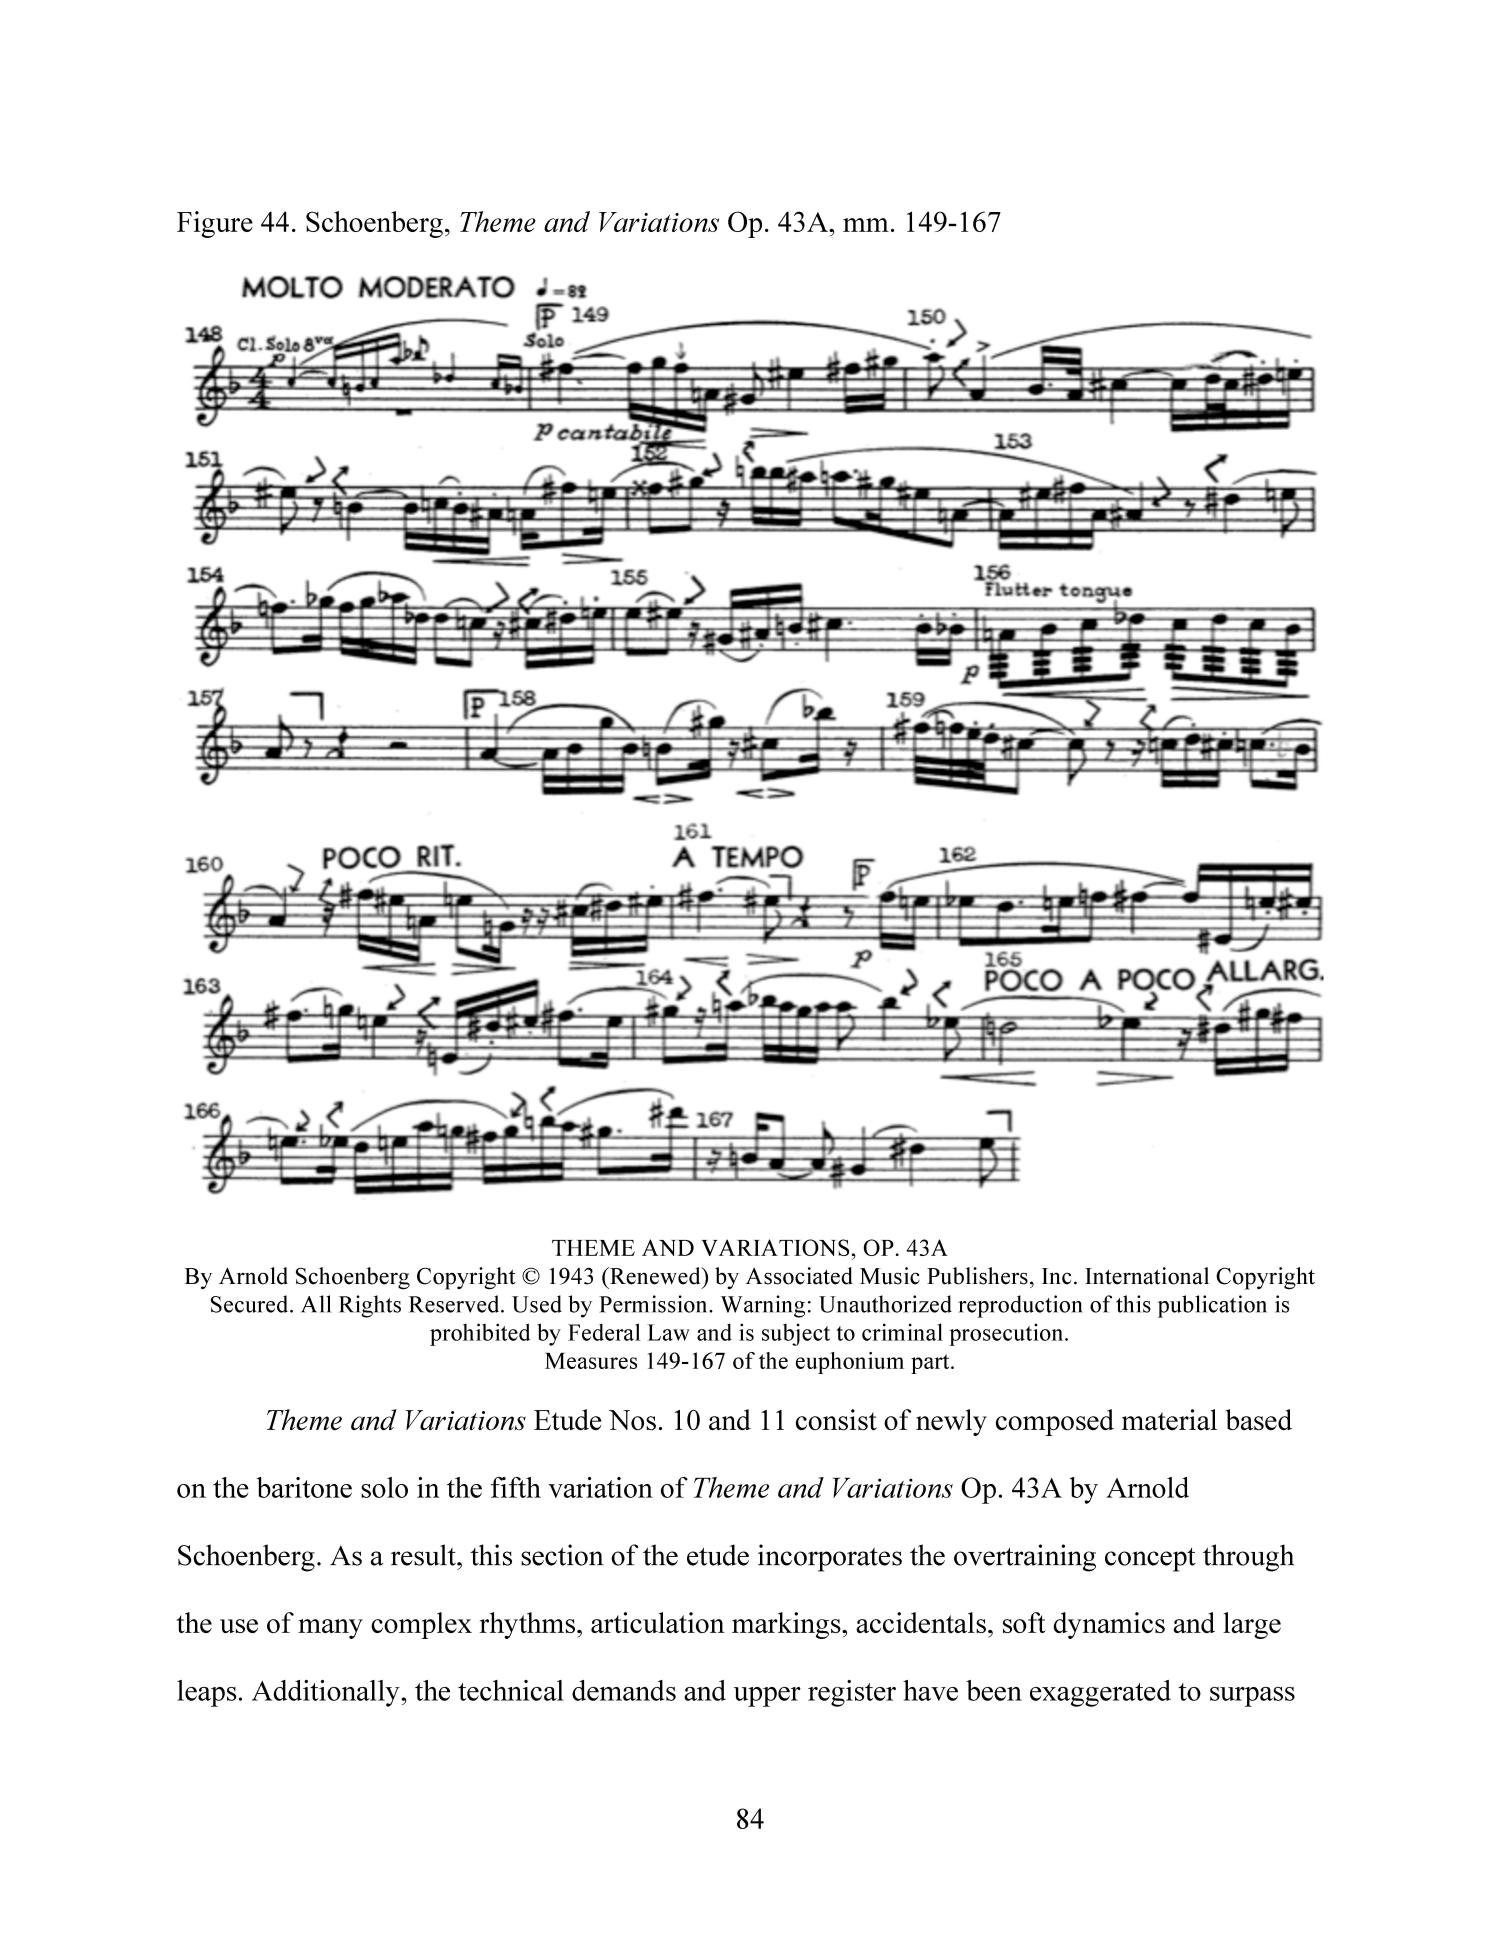 Preparing selected wind band euphonium audition materials through the use of etudes
                                                
                                                    84
                                                